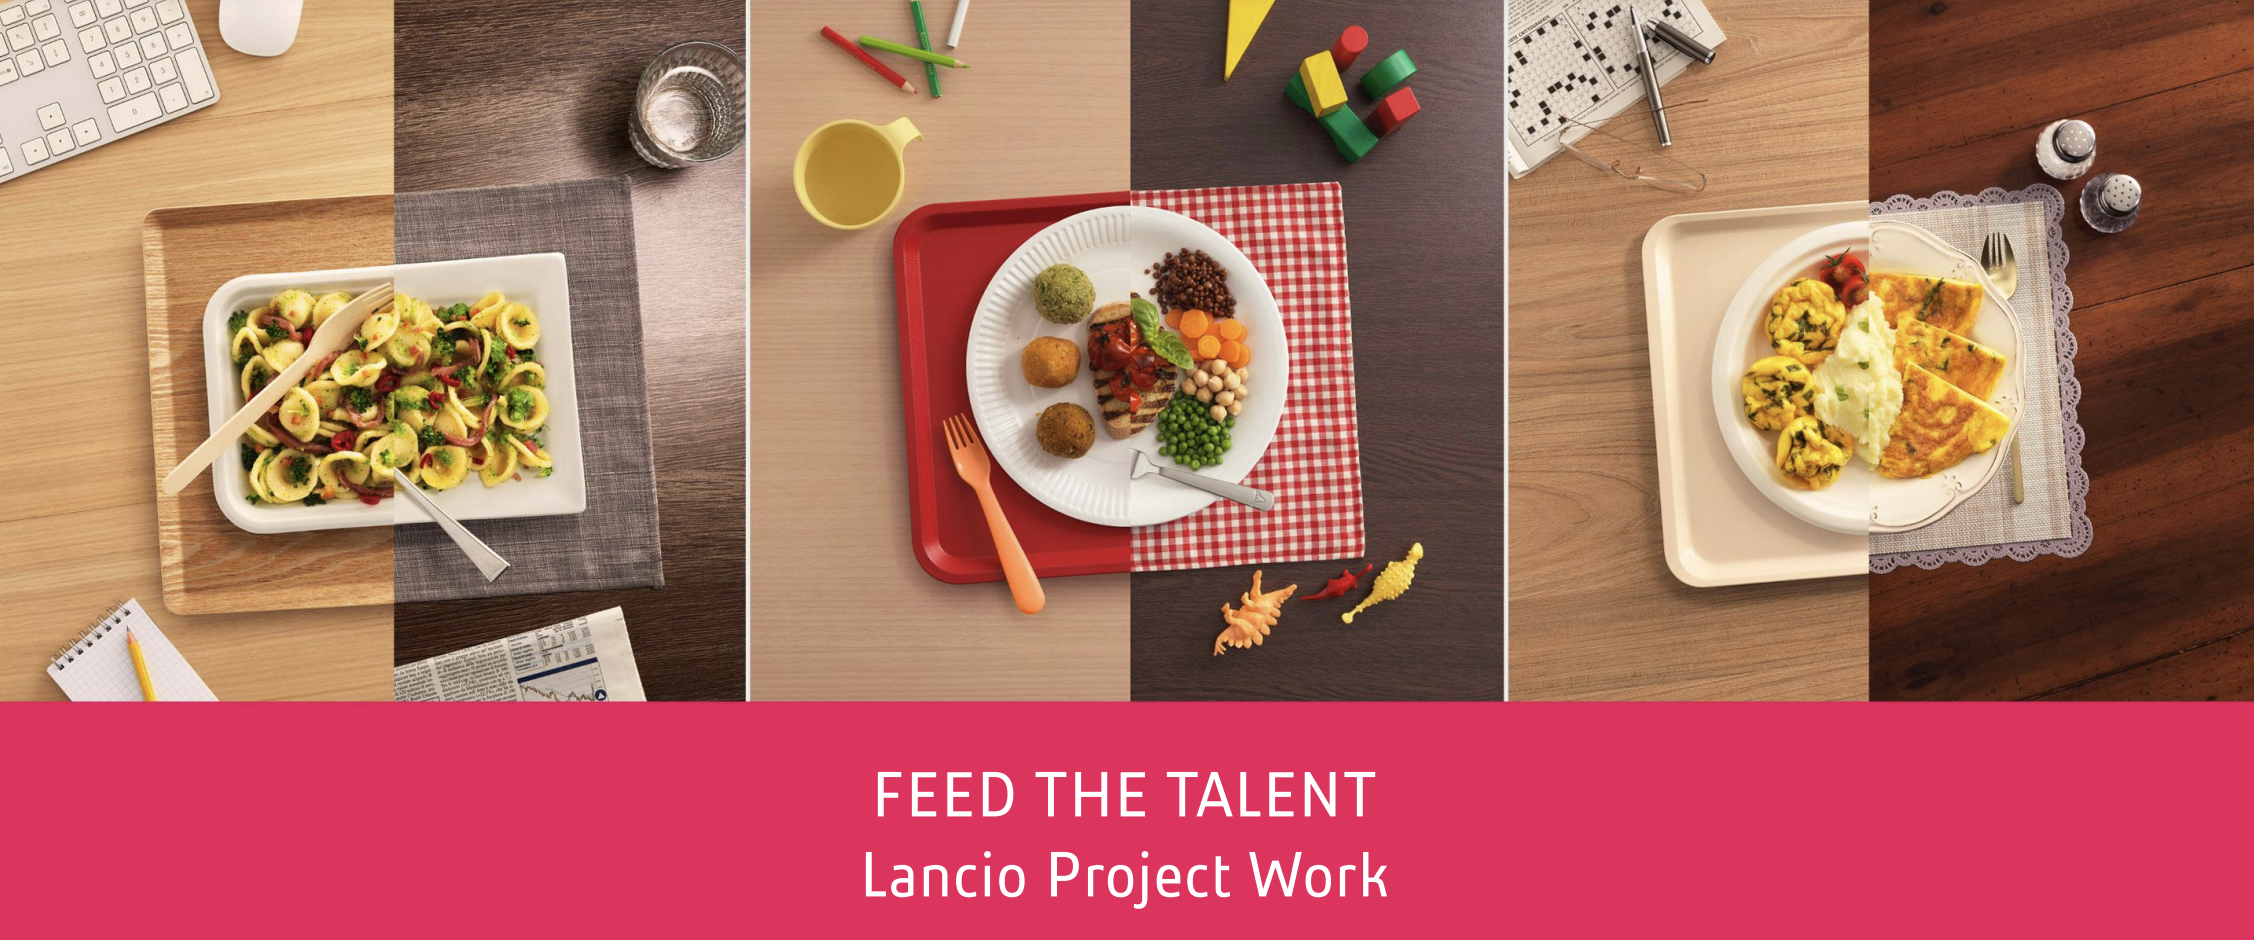 feed the talent elior